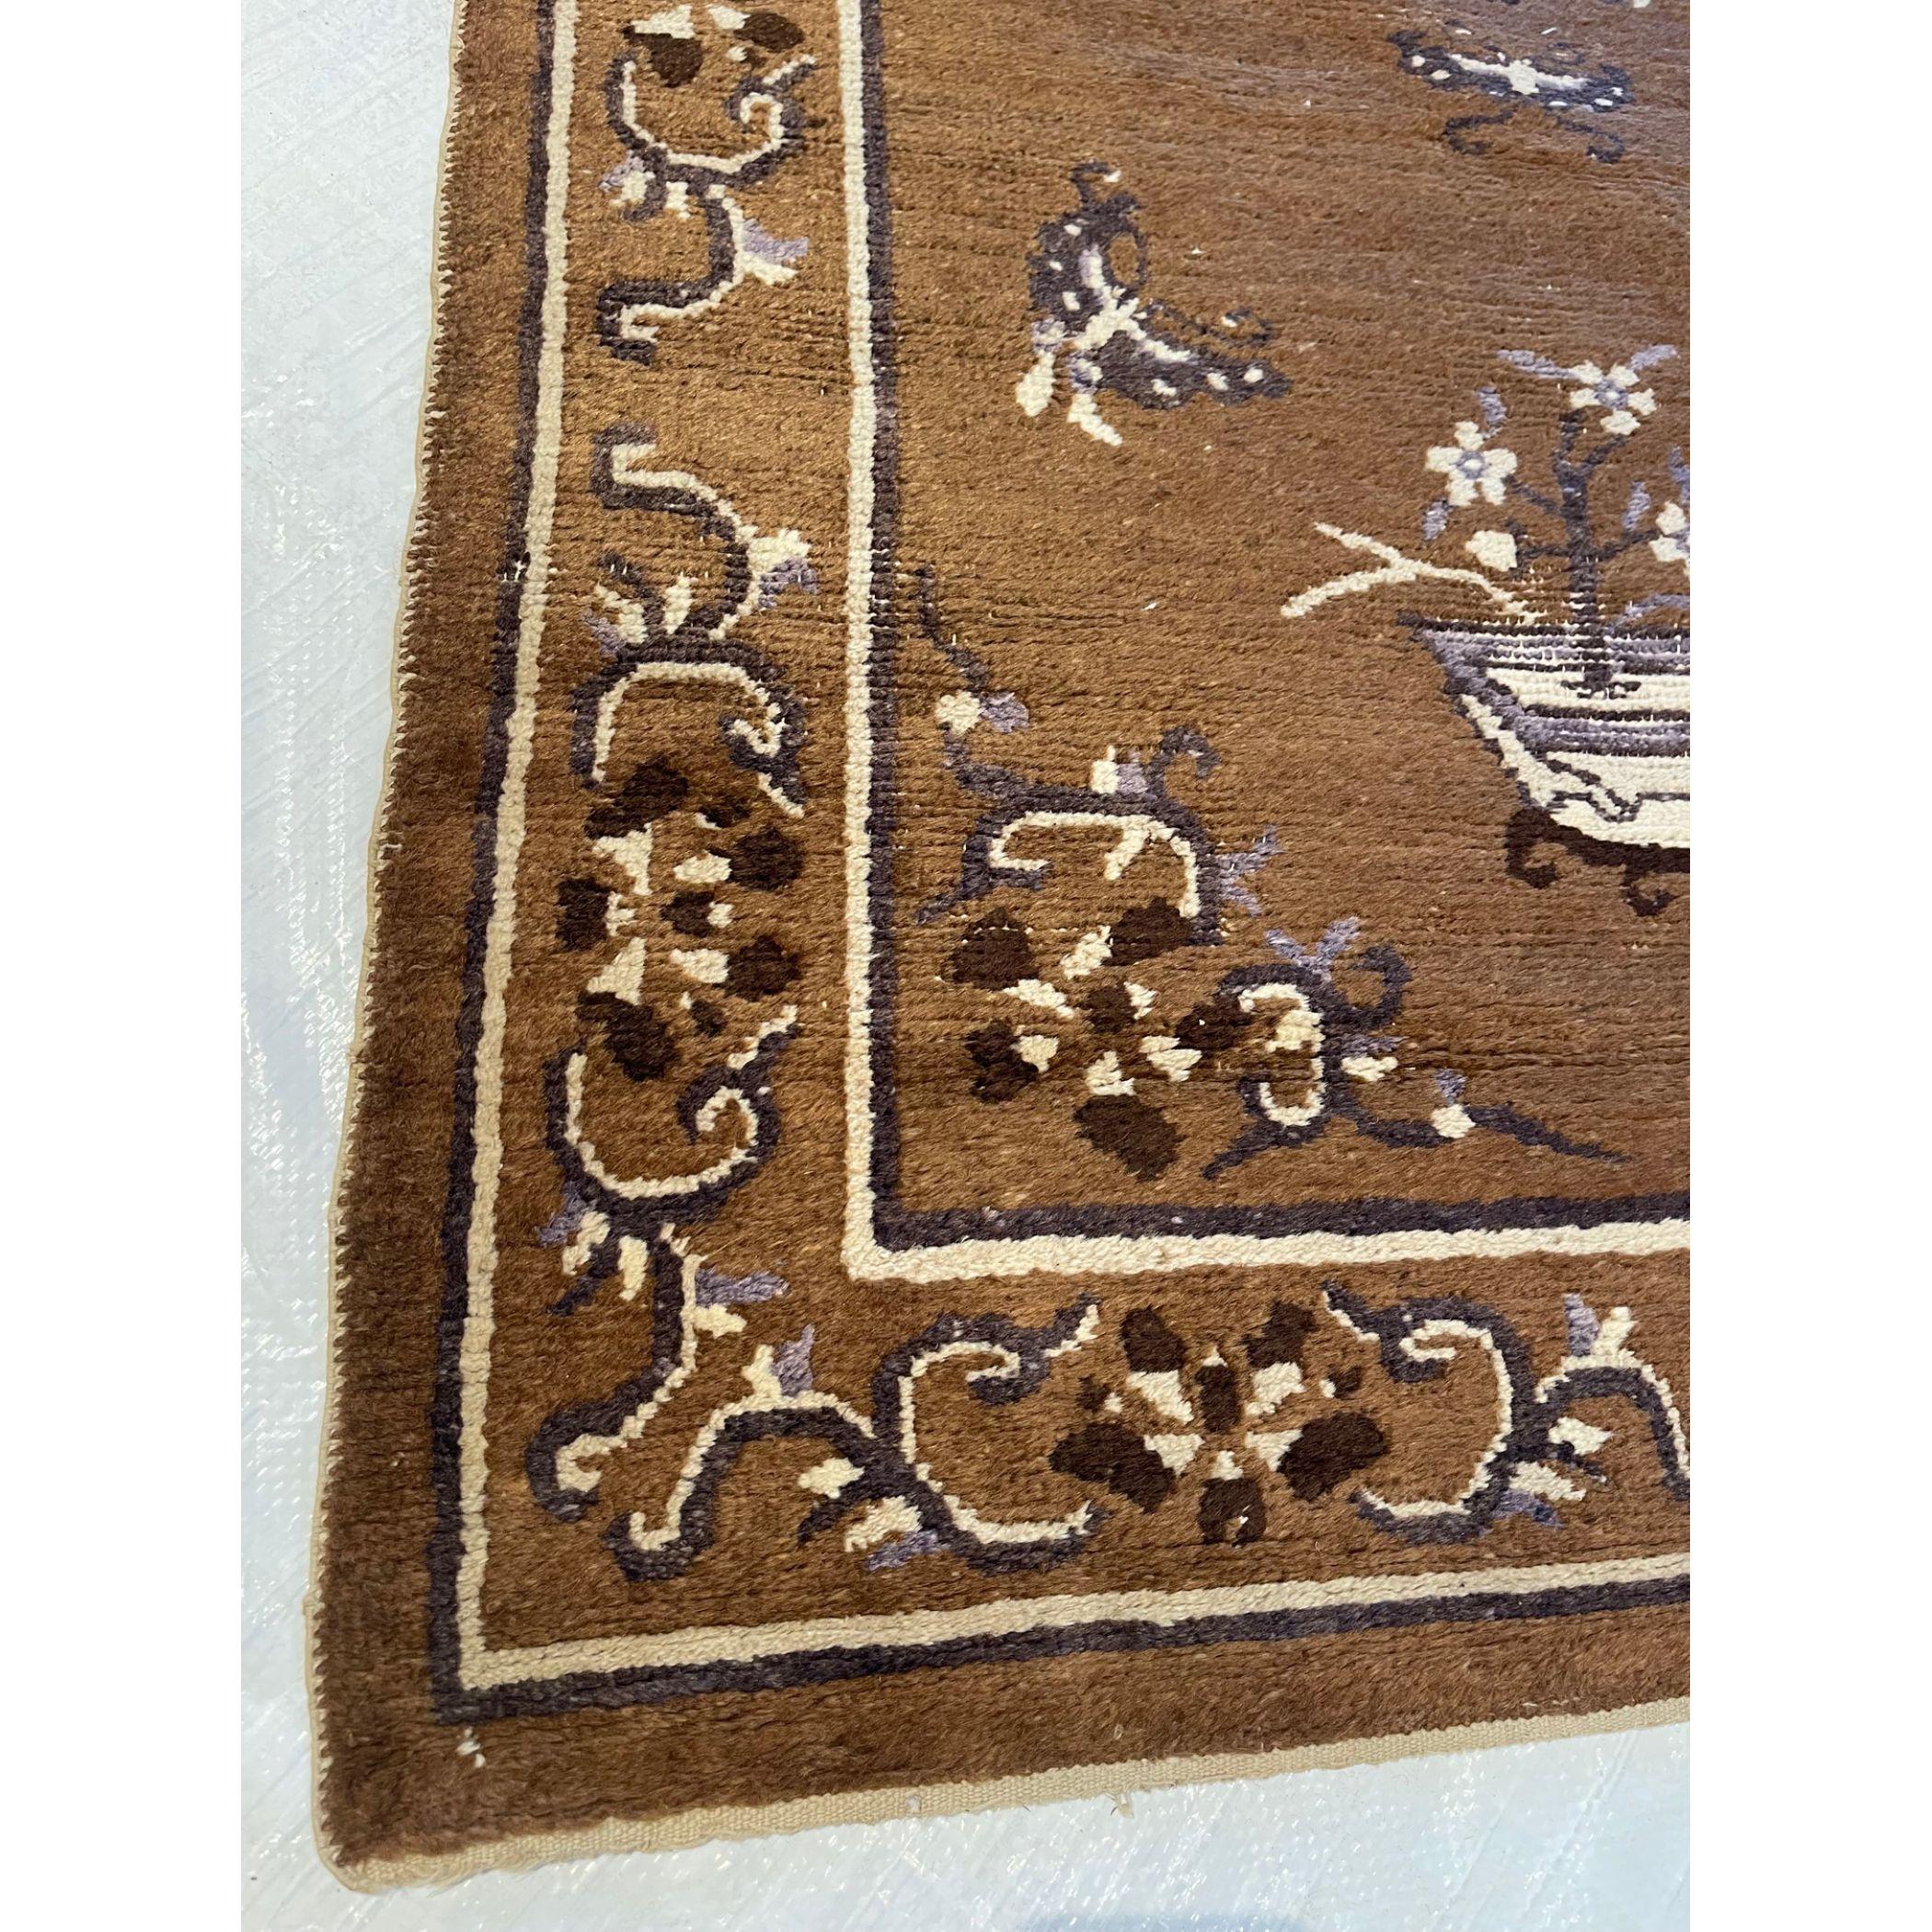 Antique Chinese Rugs, as opposed to most of the antique rug productions, were woven almost exclusively for internal consumption. Since they were mostly sheltered from European and Western influences, this offers us the reason why these carpets have